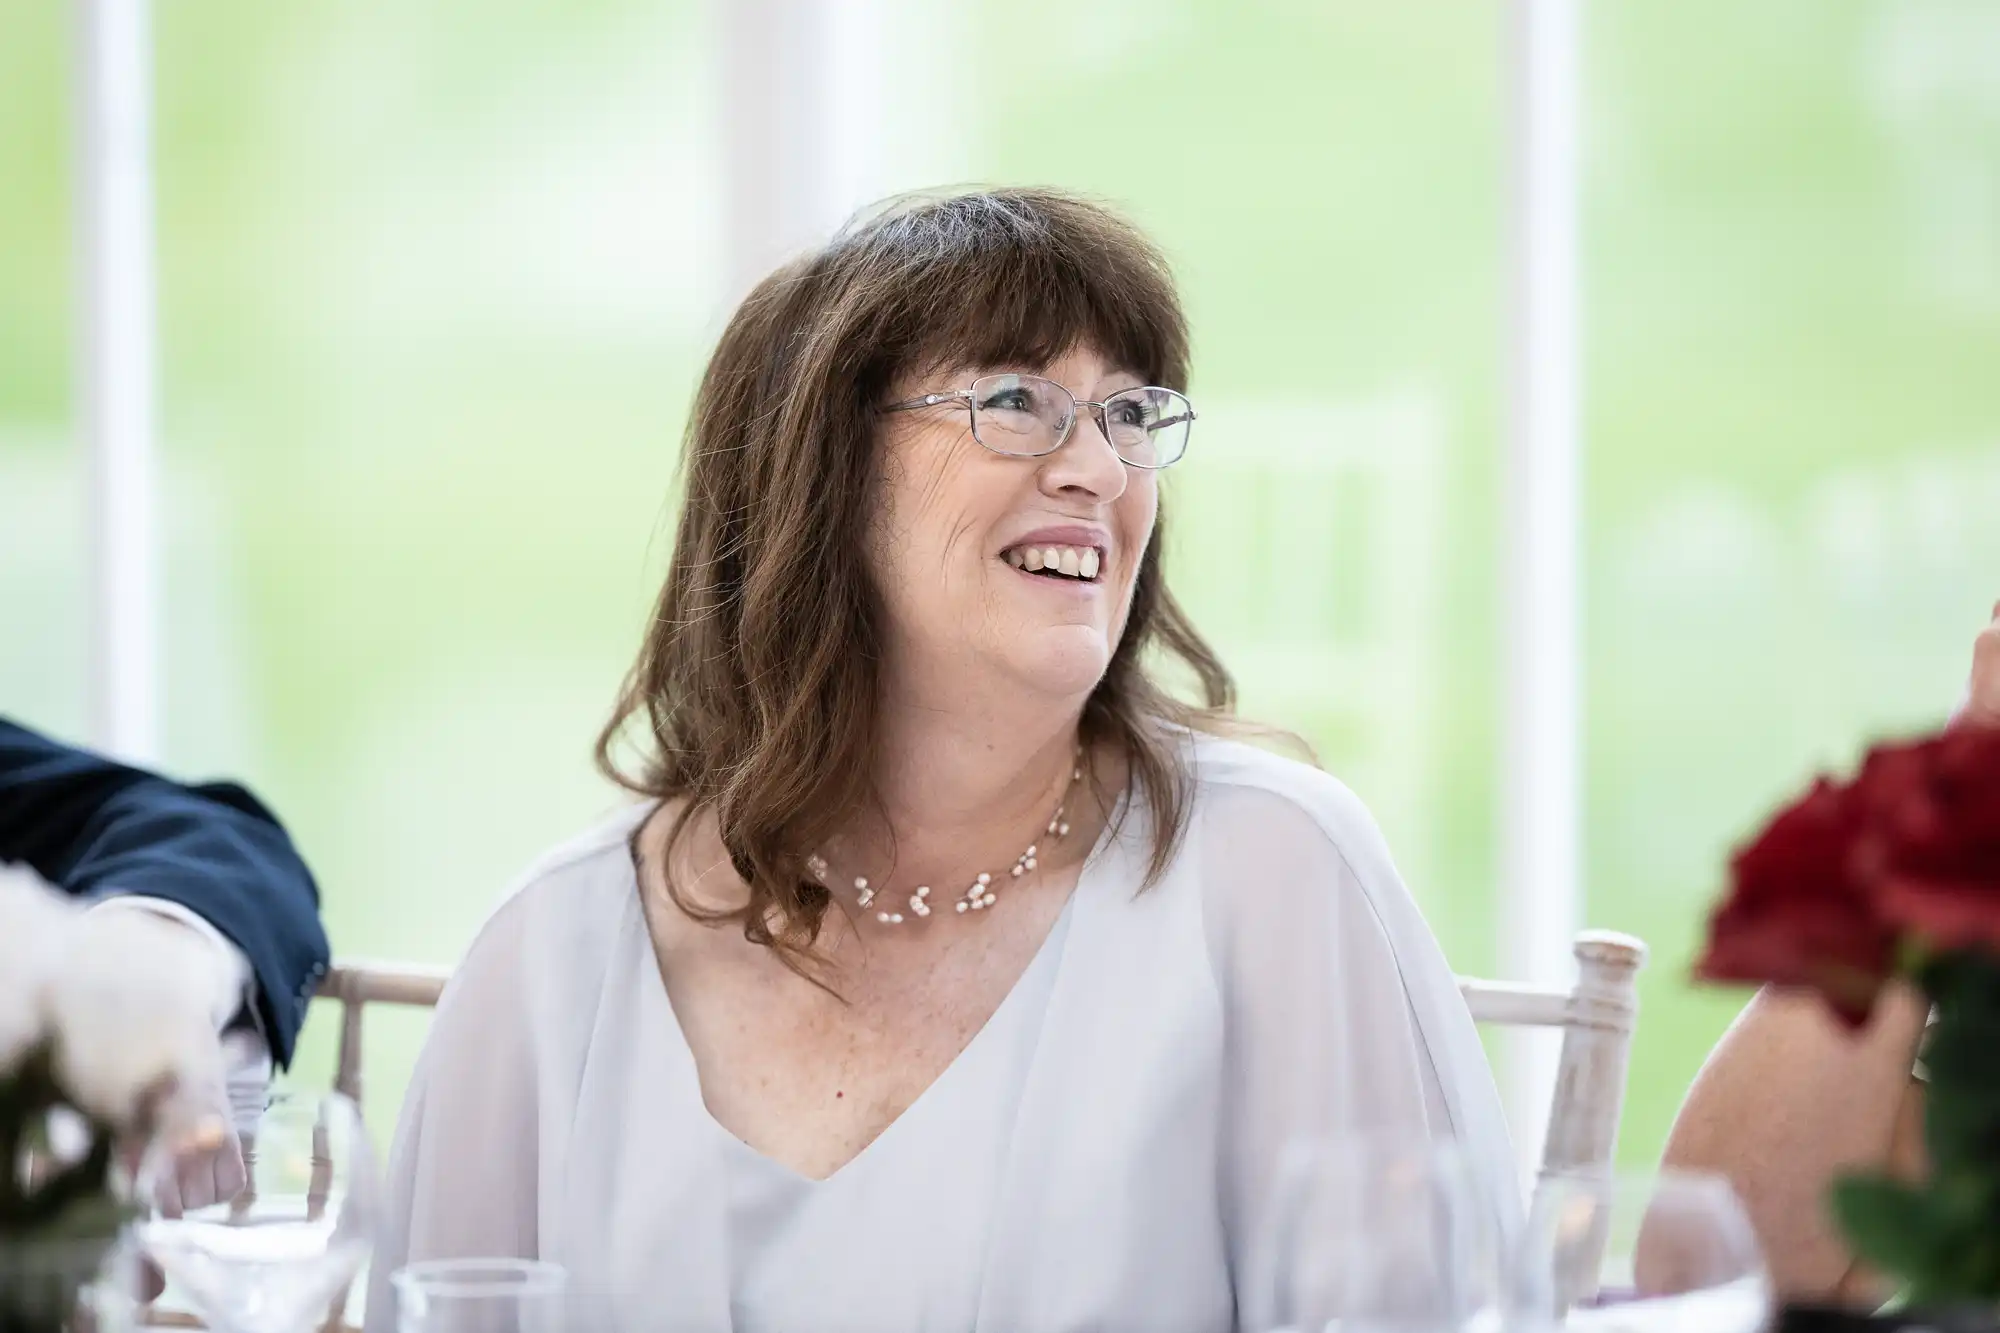 A woman with glasses and shoulder-length brown hair is smiling while seated at a table. She is wearing a light-colored blouse and a beaded necklace.